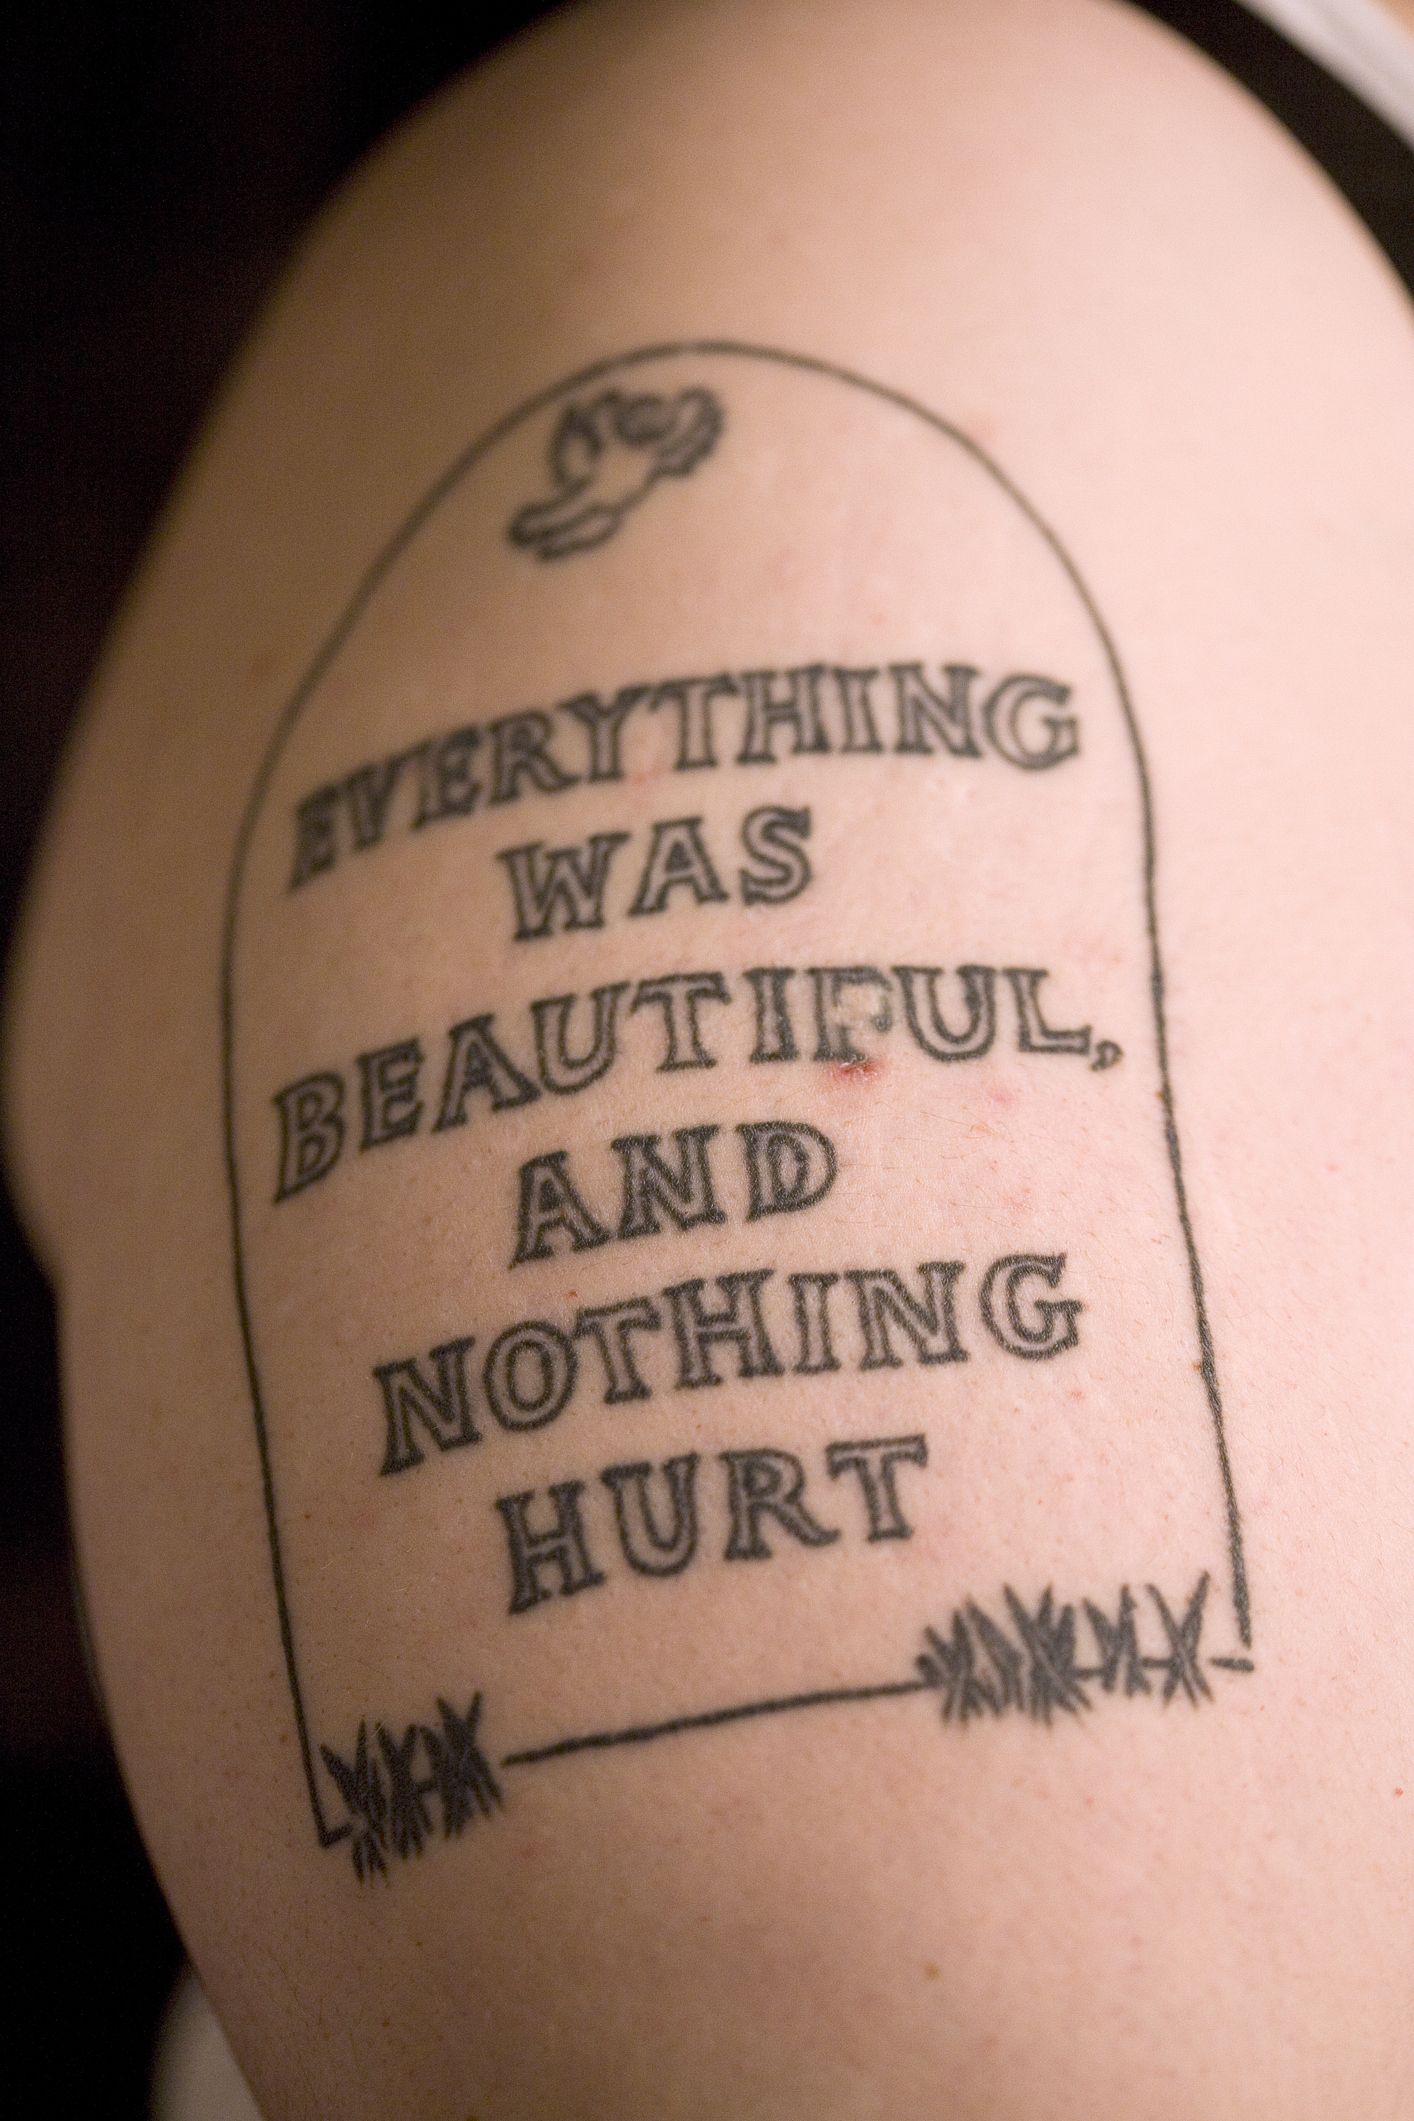 Hip Tattoo Quotes: Inspiring and Meaningful Phrases for Hip Tattoos